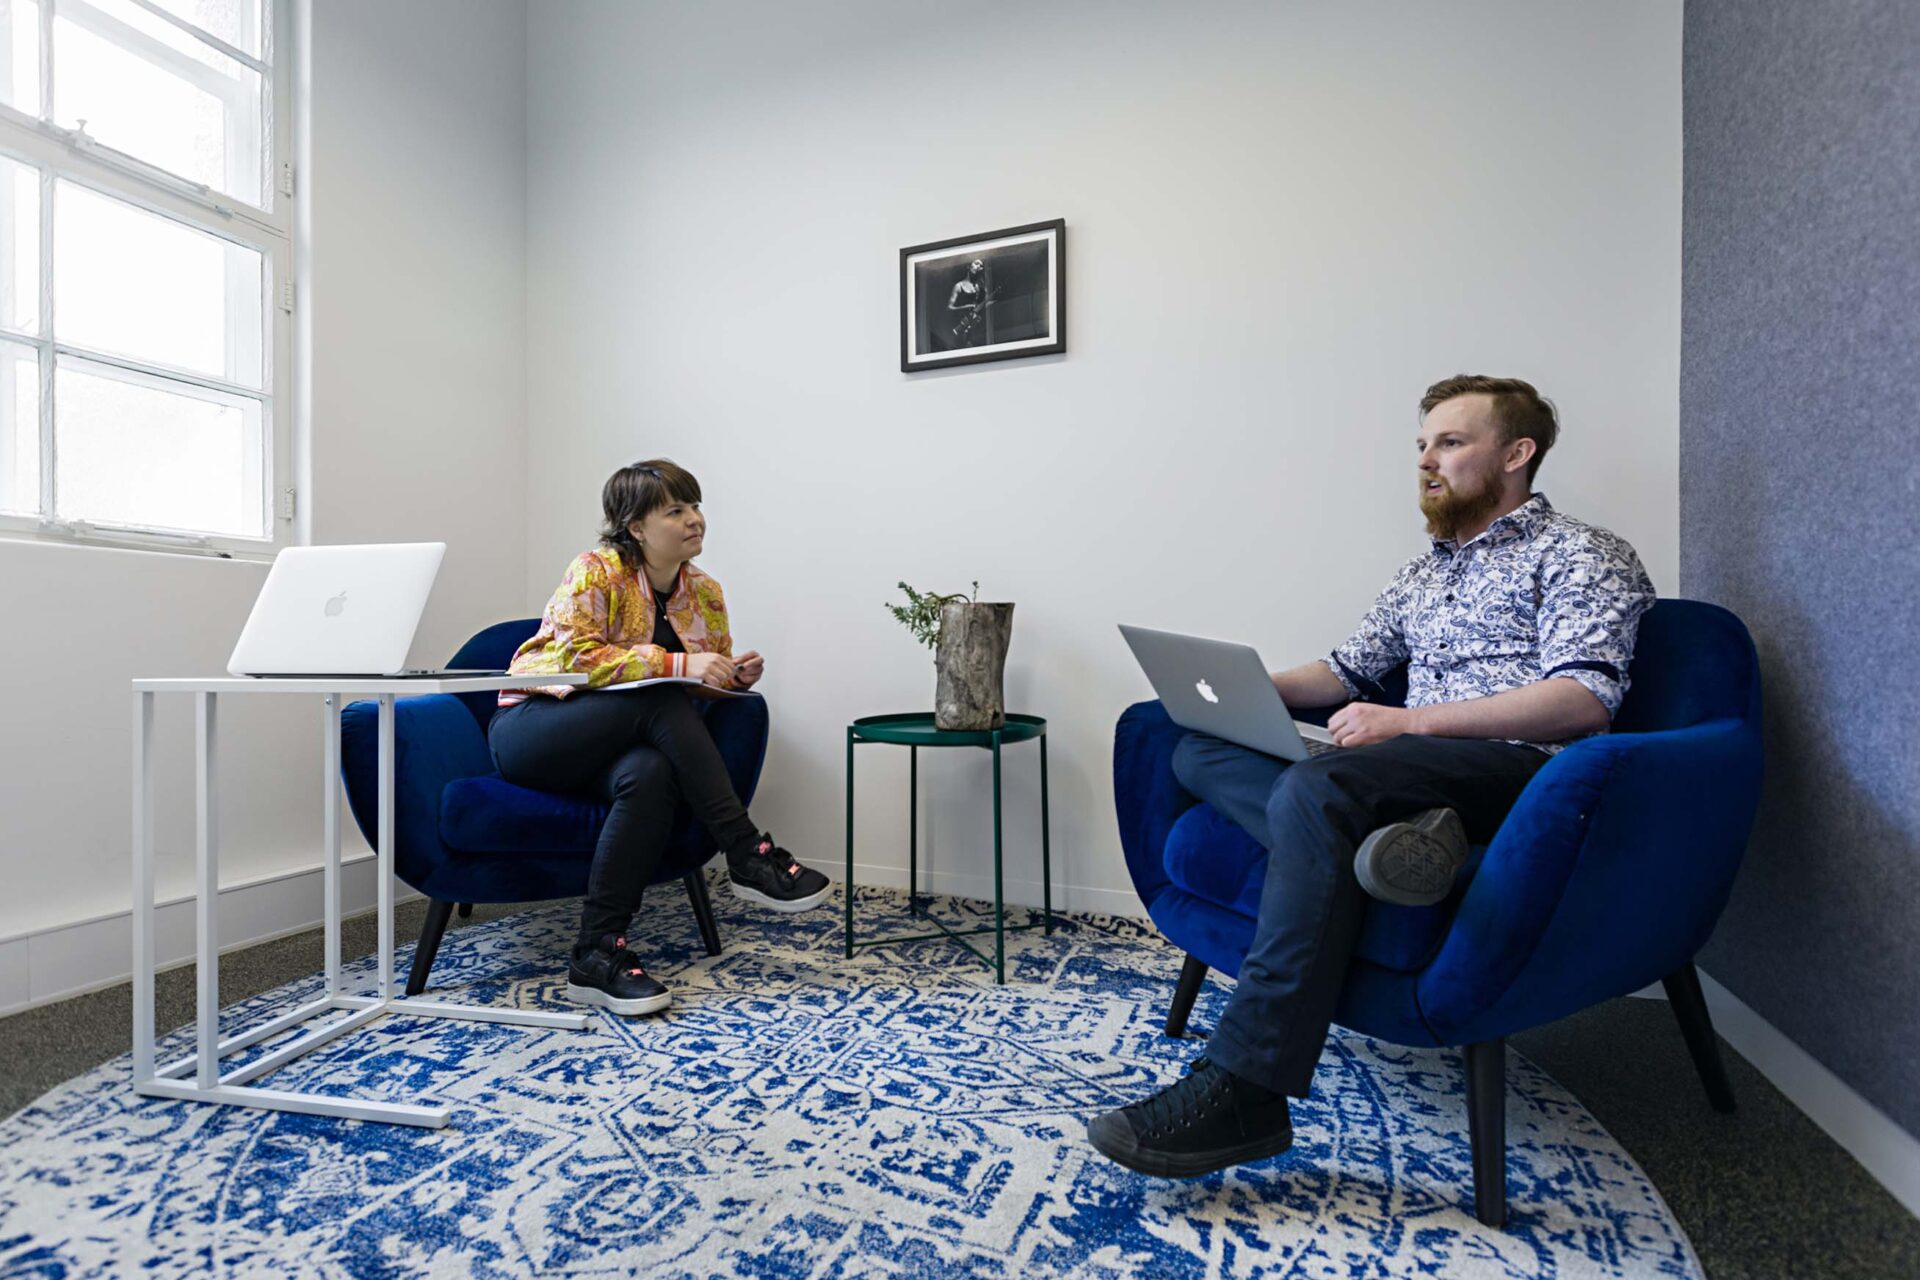 Two people meeting in co-work space, sitting on blue chairs and using laptops. The rug below them is blue and white.